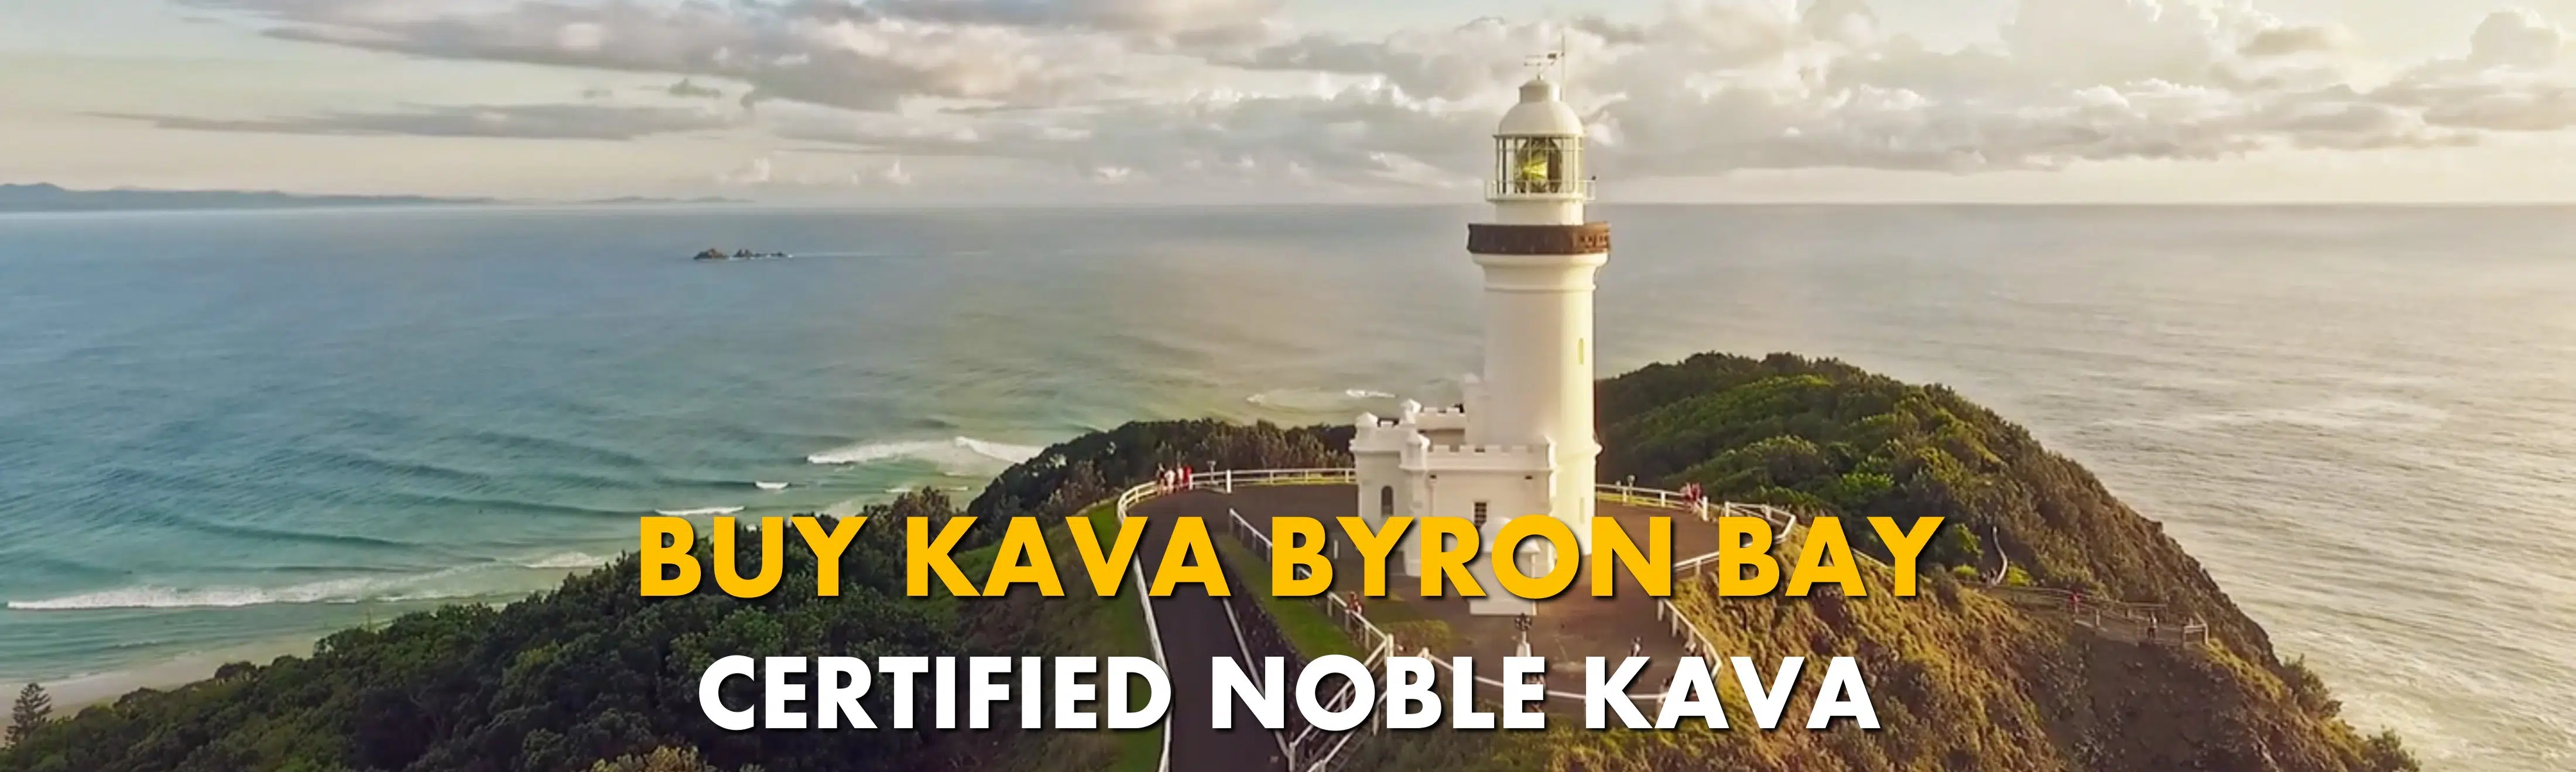 Lighthouse in Byron Bay New South Wales with caption Buy Kava Byron Bay Certified Noble Kava